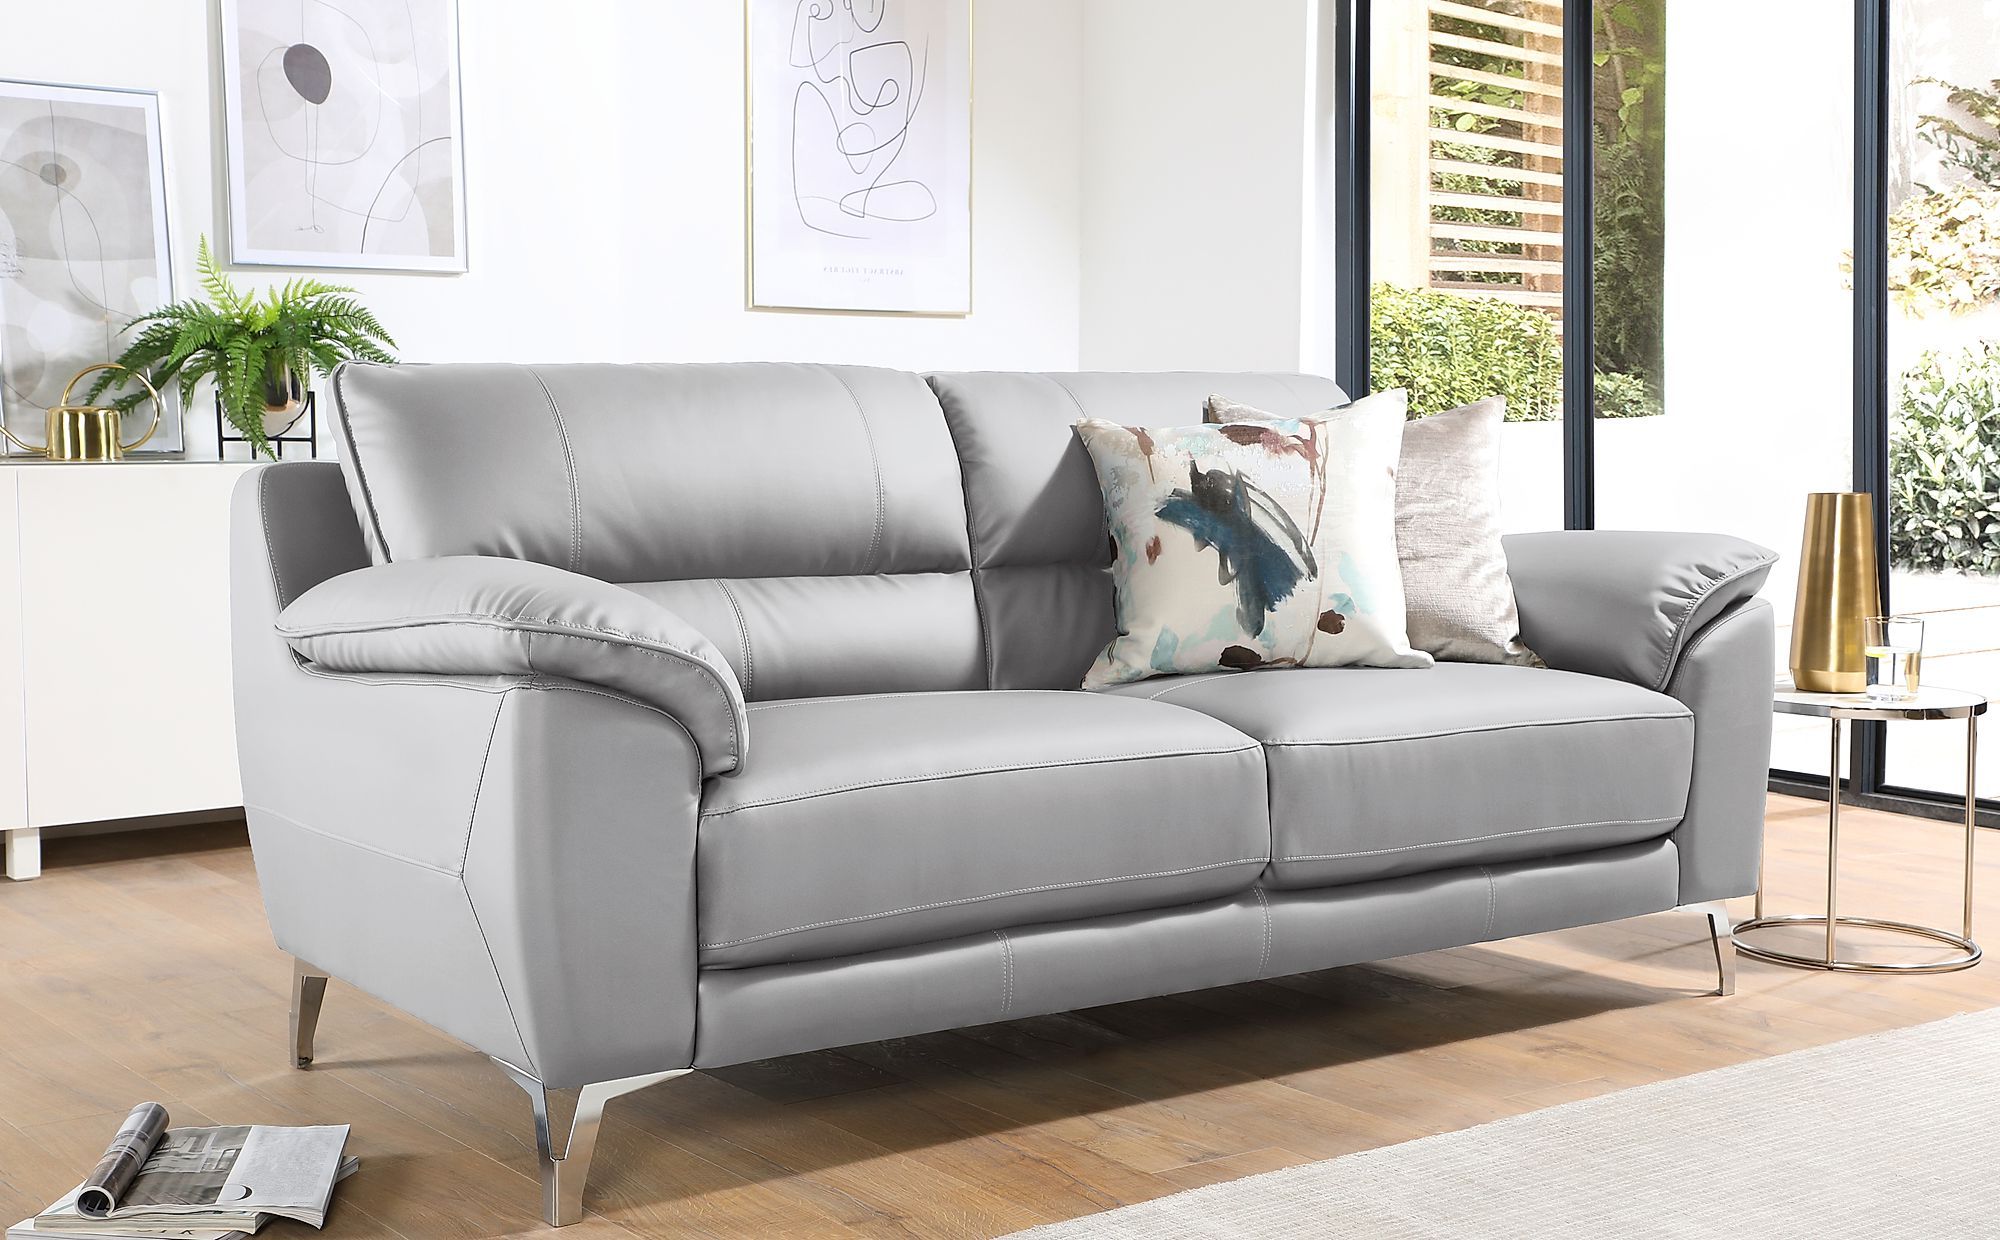 Madrid Light Grey Leather 3 Seater Sofa | Furniture Choice For Sofas In Light Gray (Gallery 1 of 20)